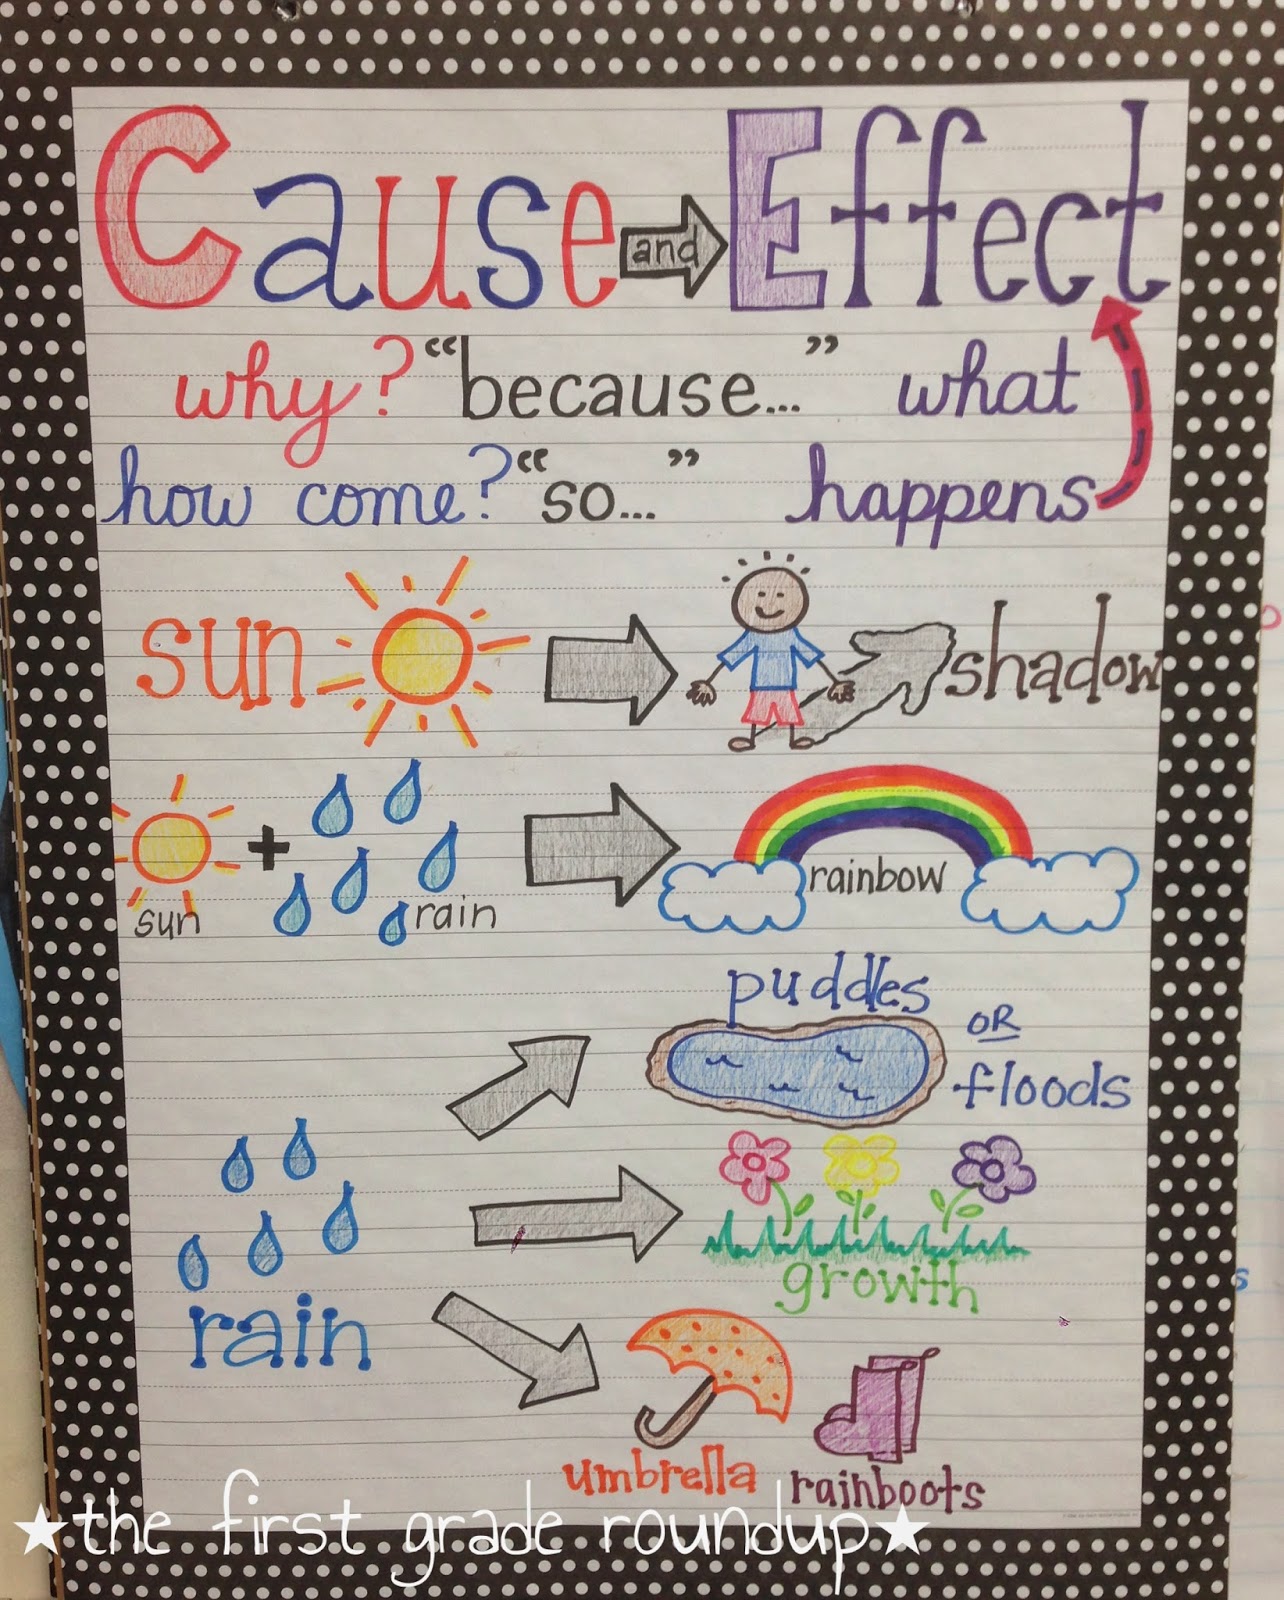 Cause And Effect Chart